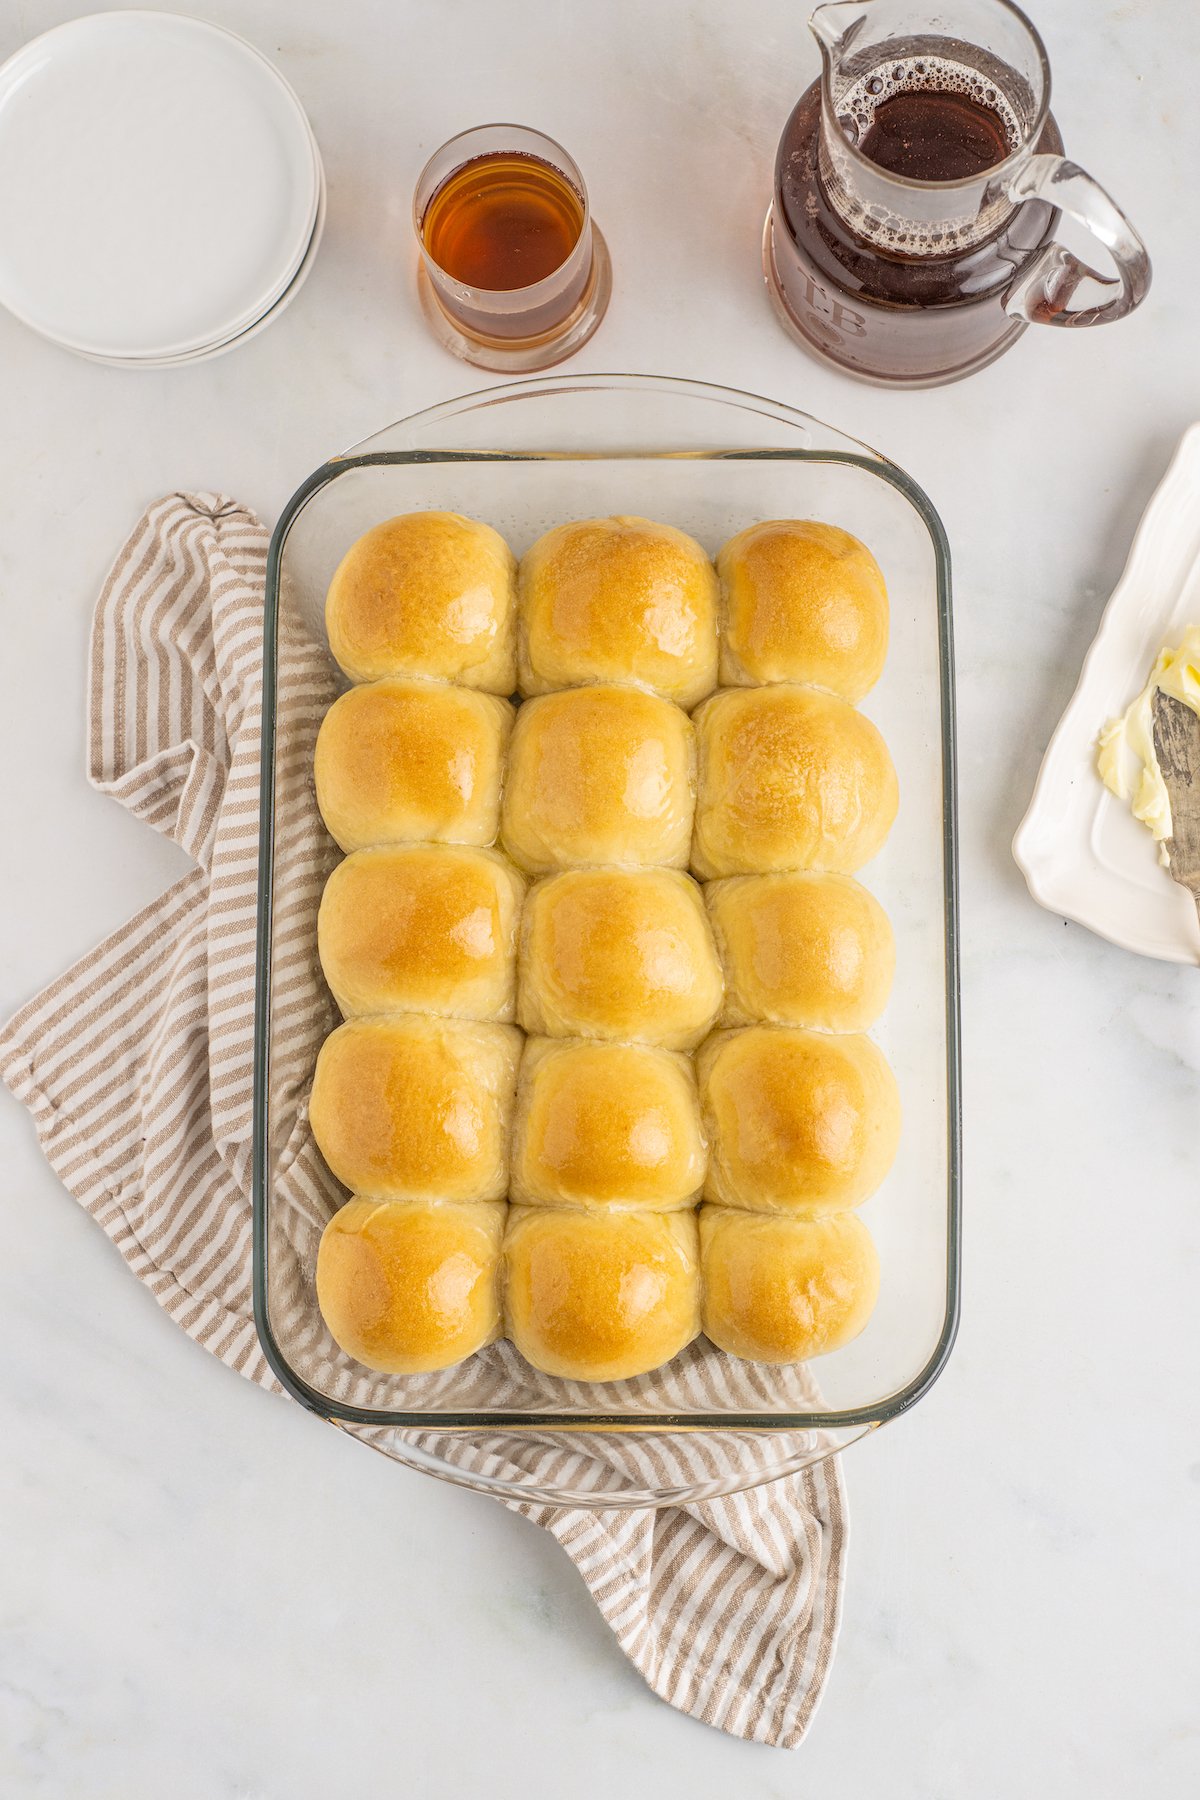 Baked homemade potato rolls in a glass dish.